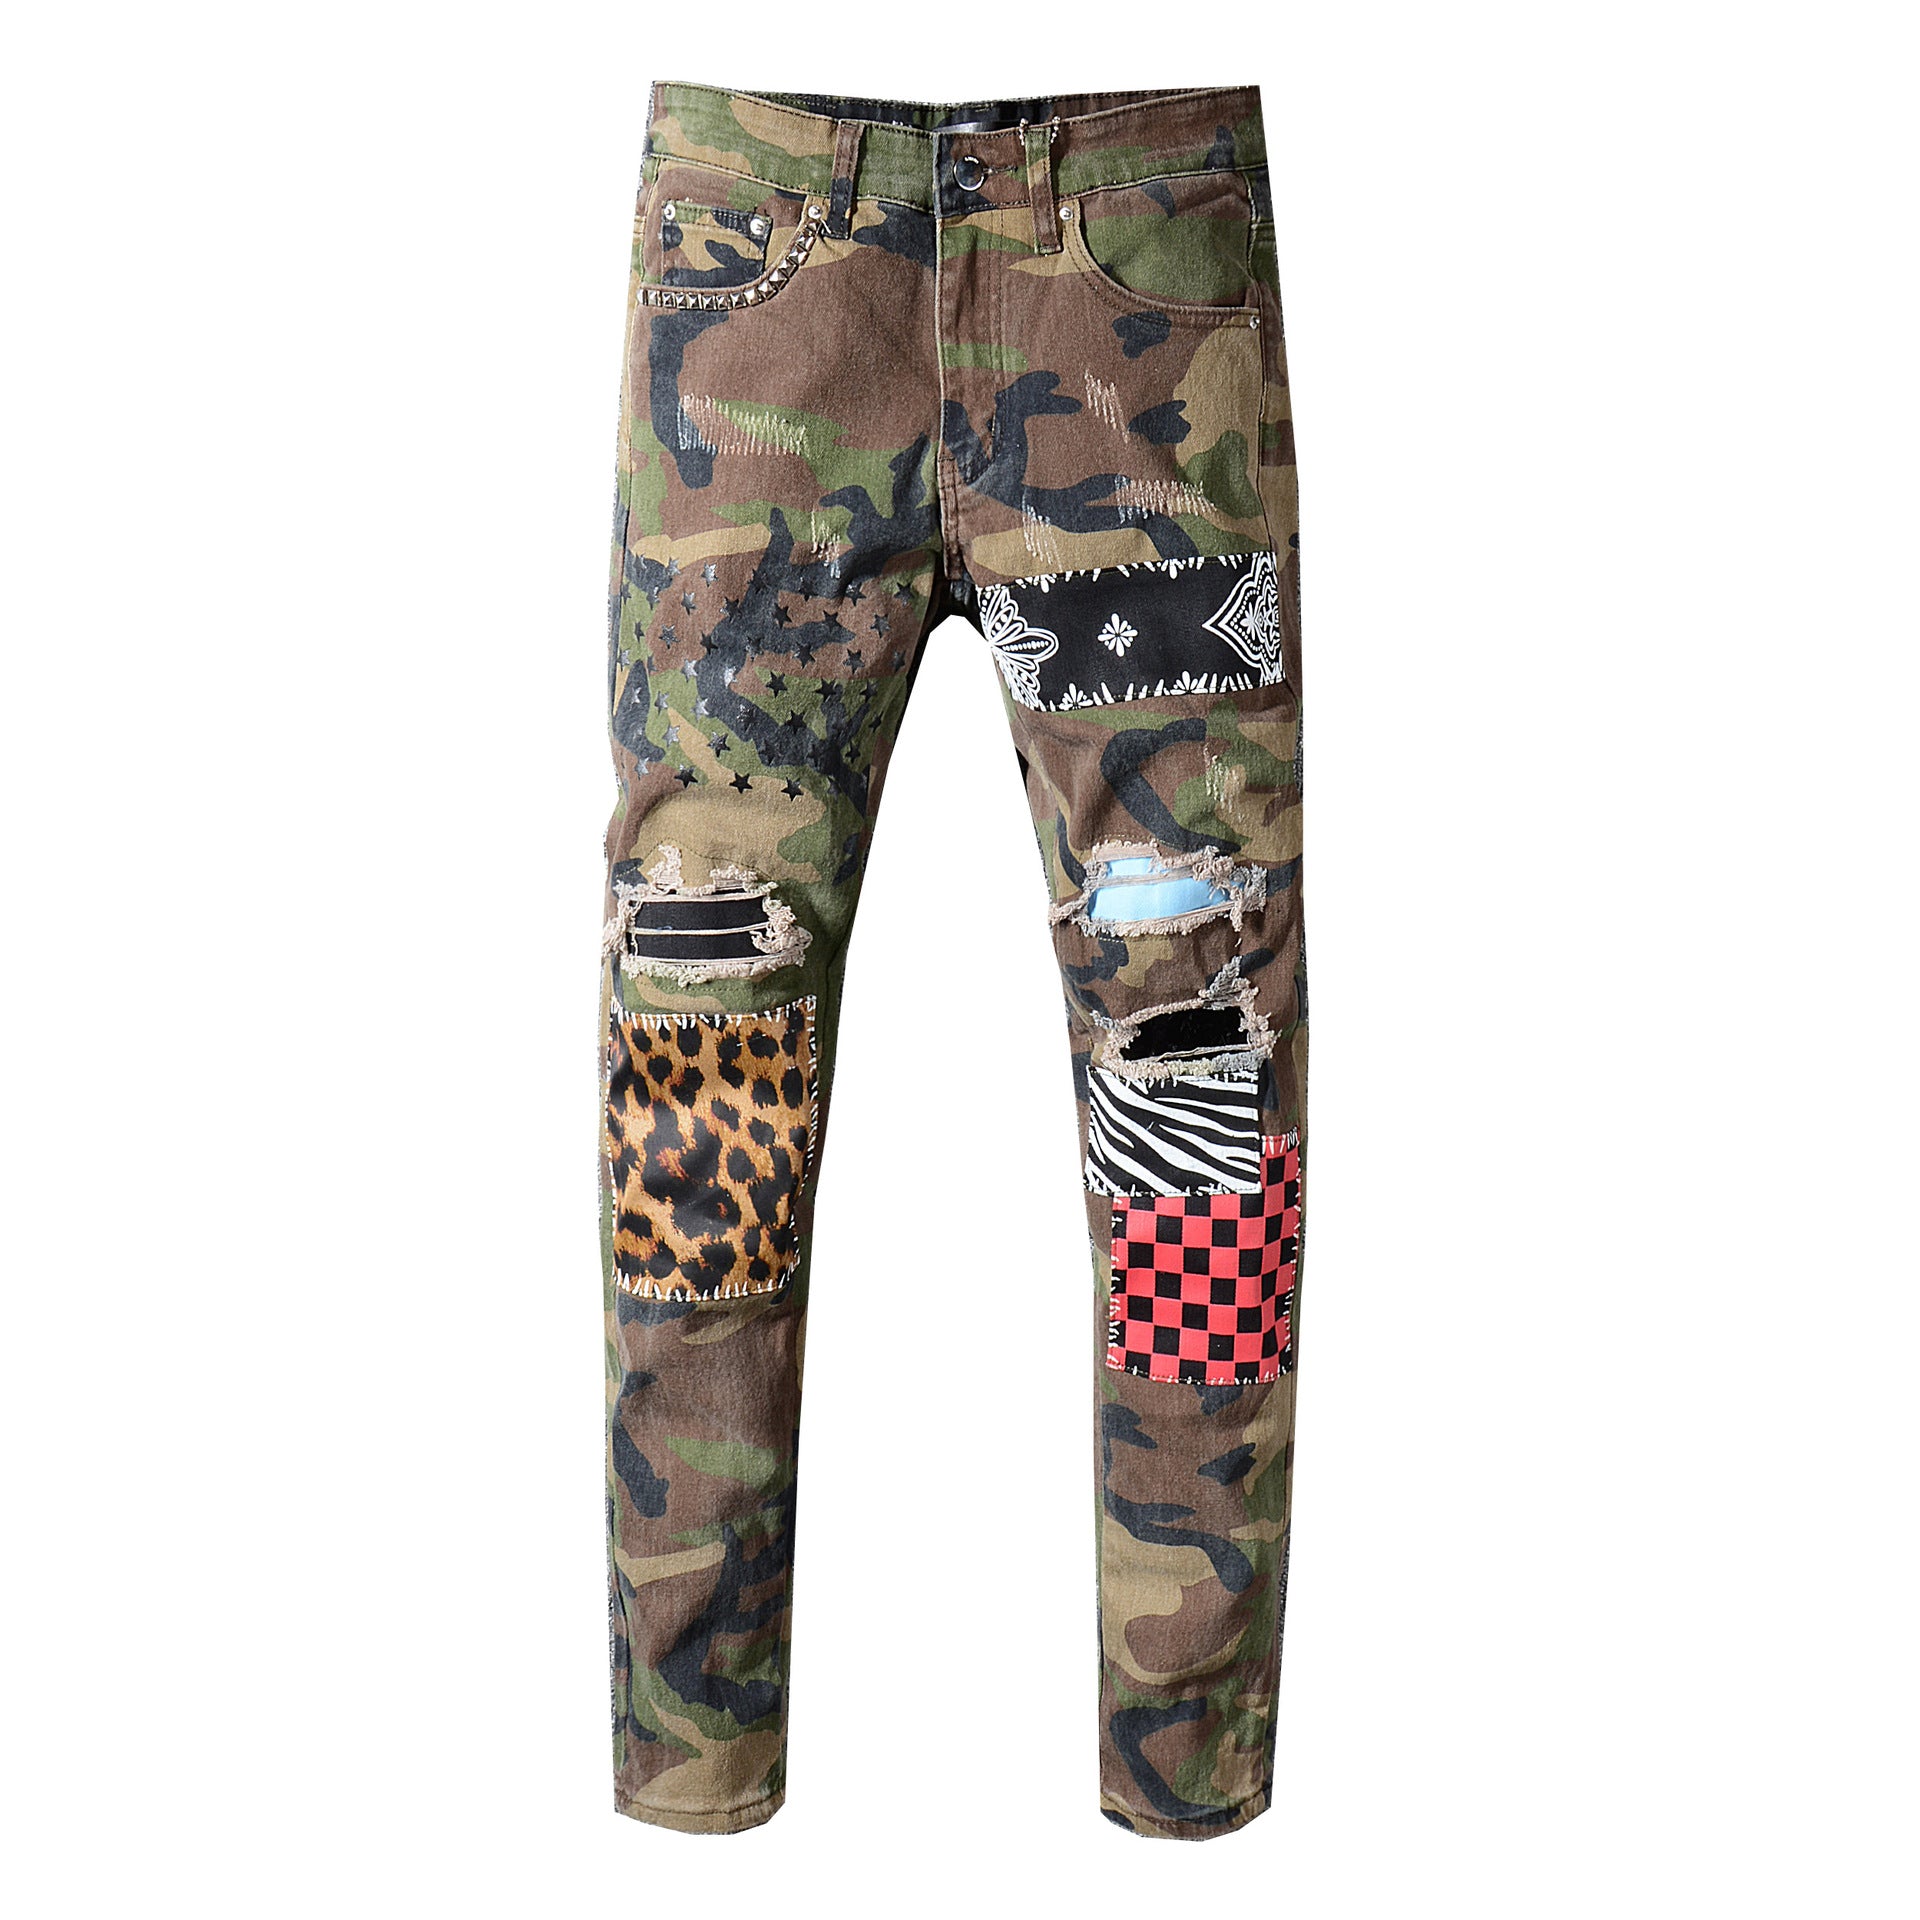 Beggar pants with printed patch